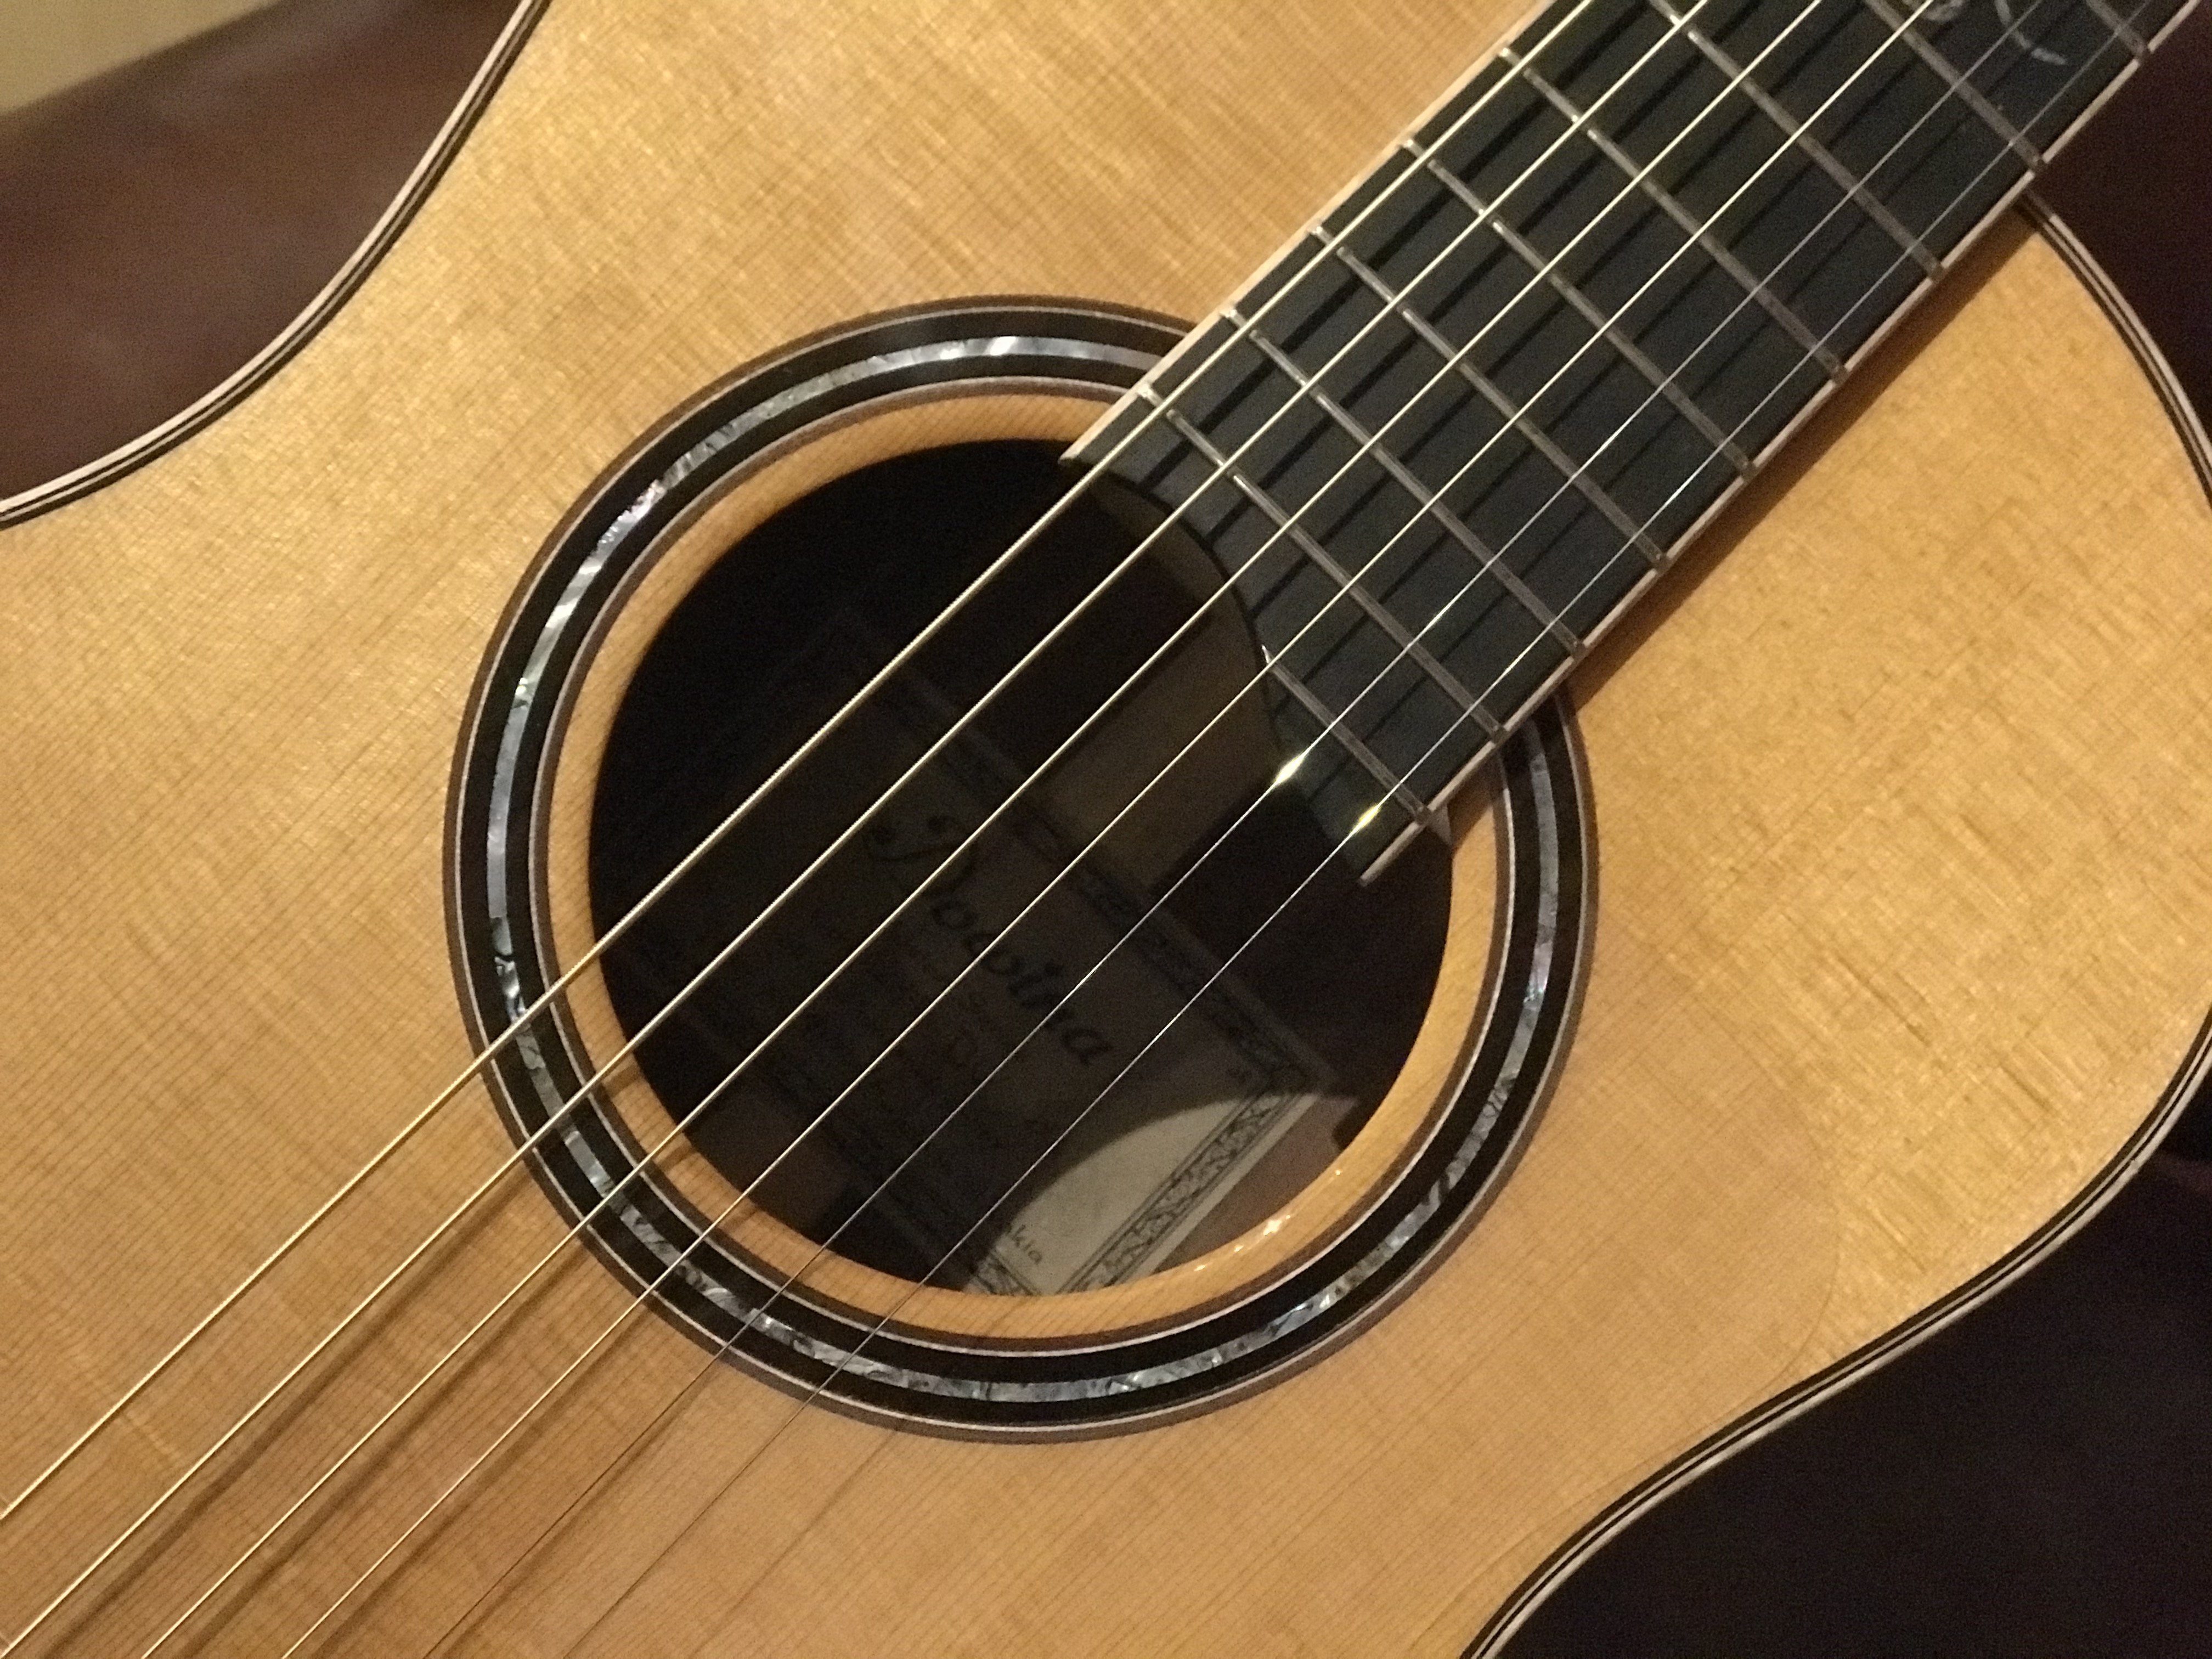 Dowina Granadillo DS BV Thermo Cured, Acoustic Guitar for sale at Richards Guitars.